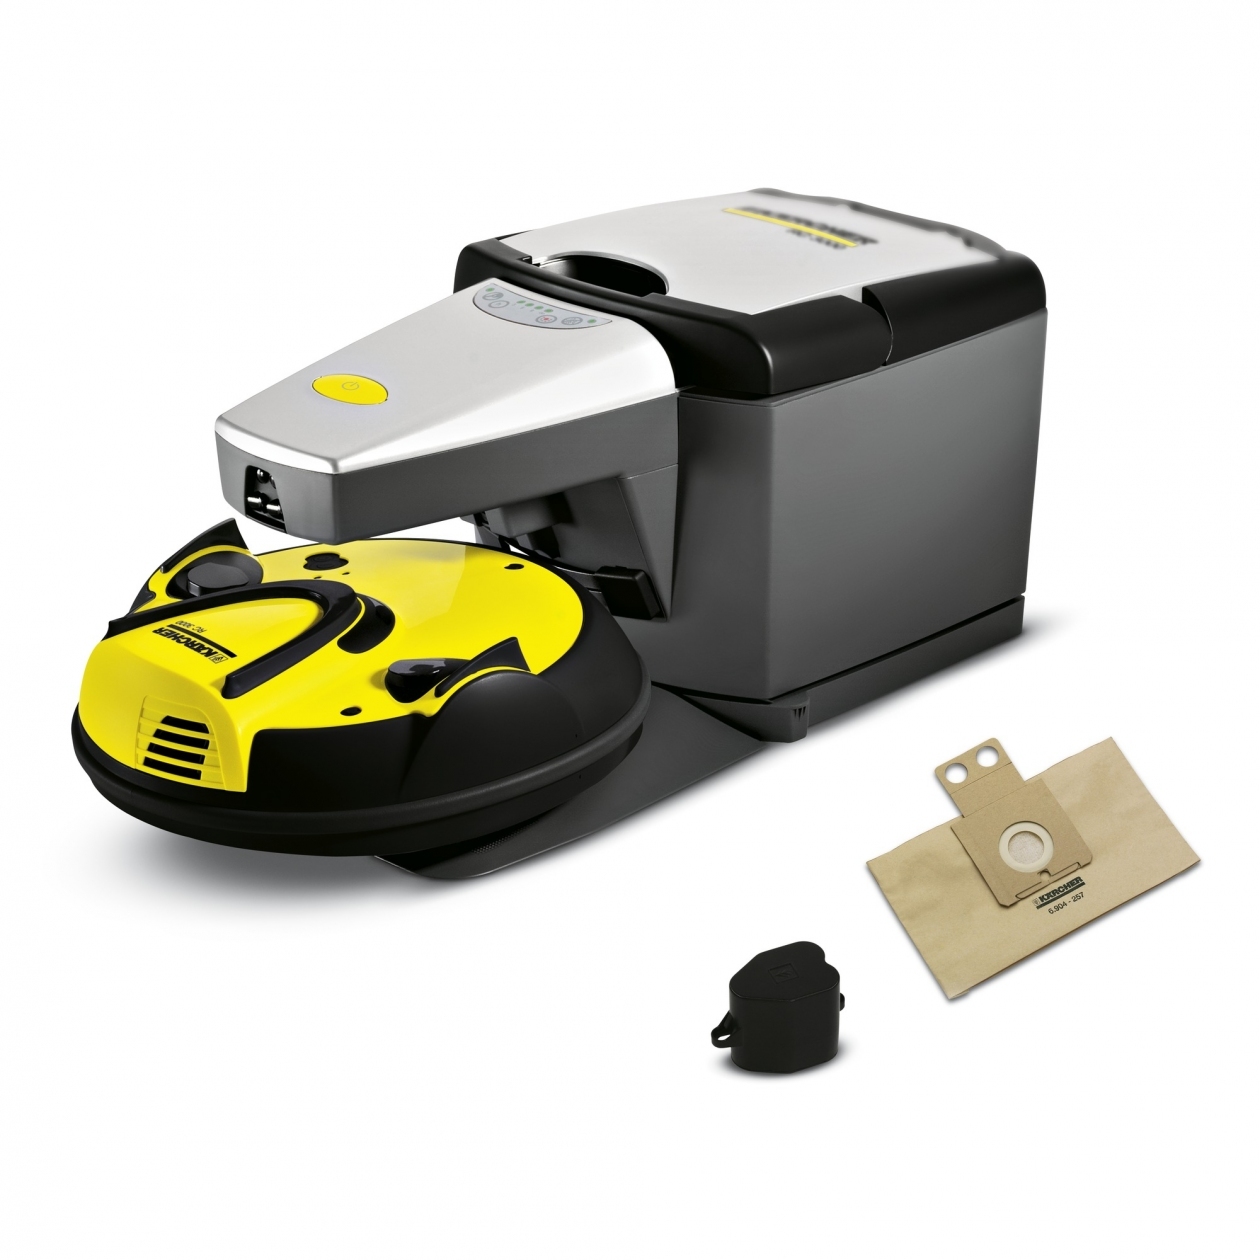 Robot vacuum cleaner on Aliexpress to 20,000 thousand rubles